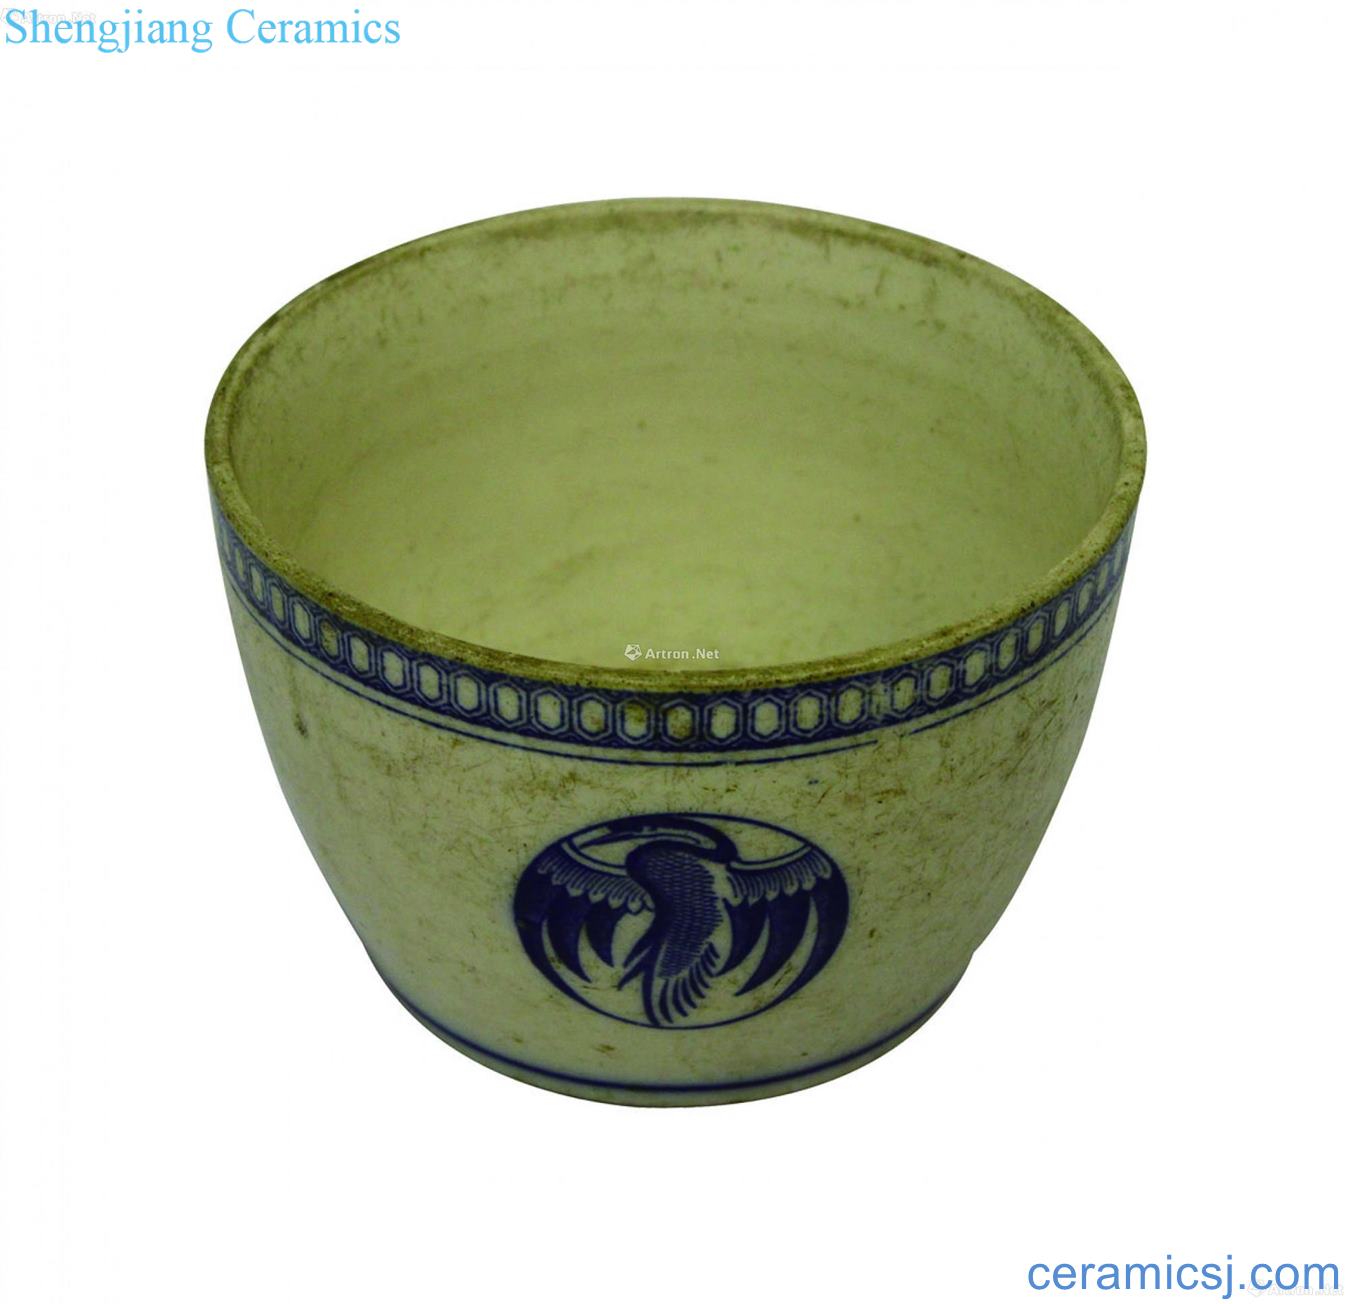 Blue and white cranes bowl